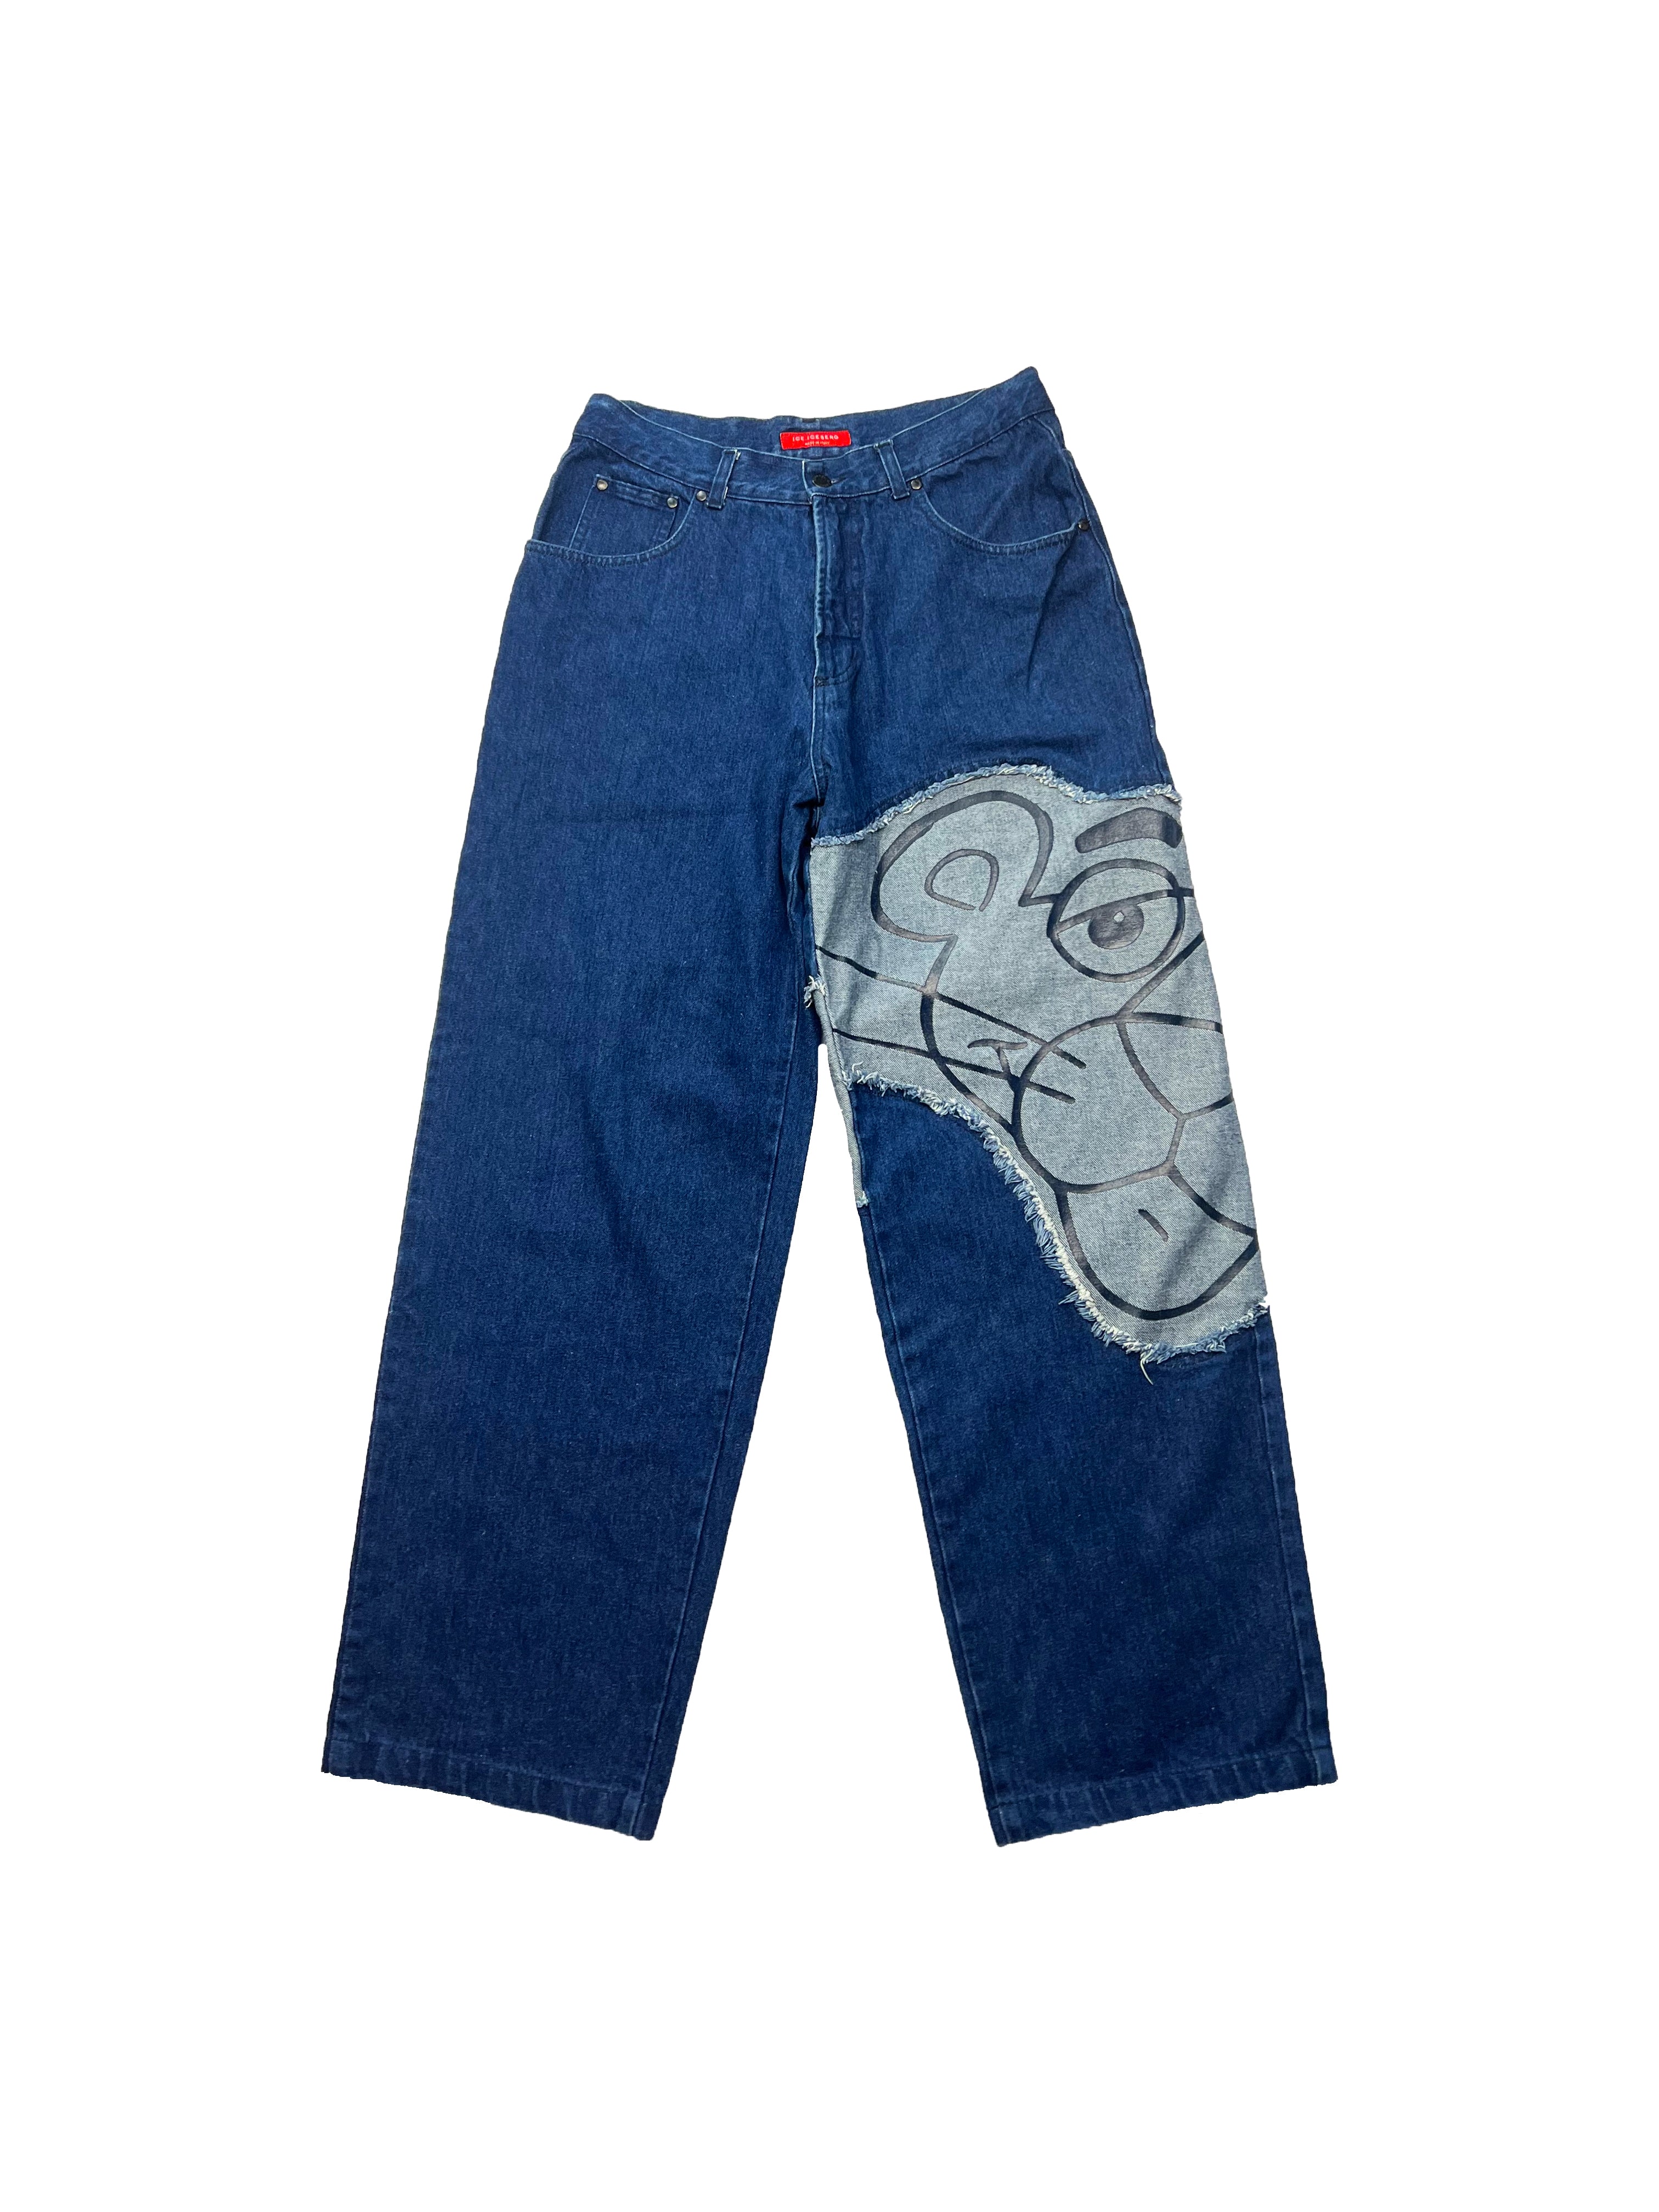 Iceberg Pink Panther Spell Out Jeans Circa 2000